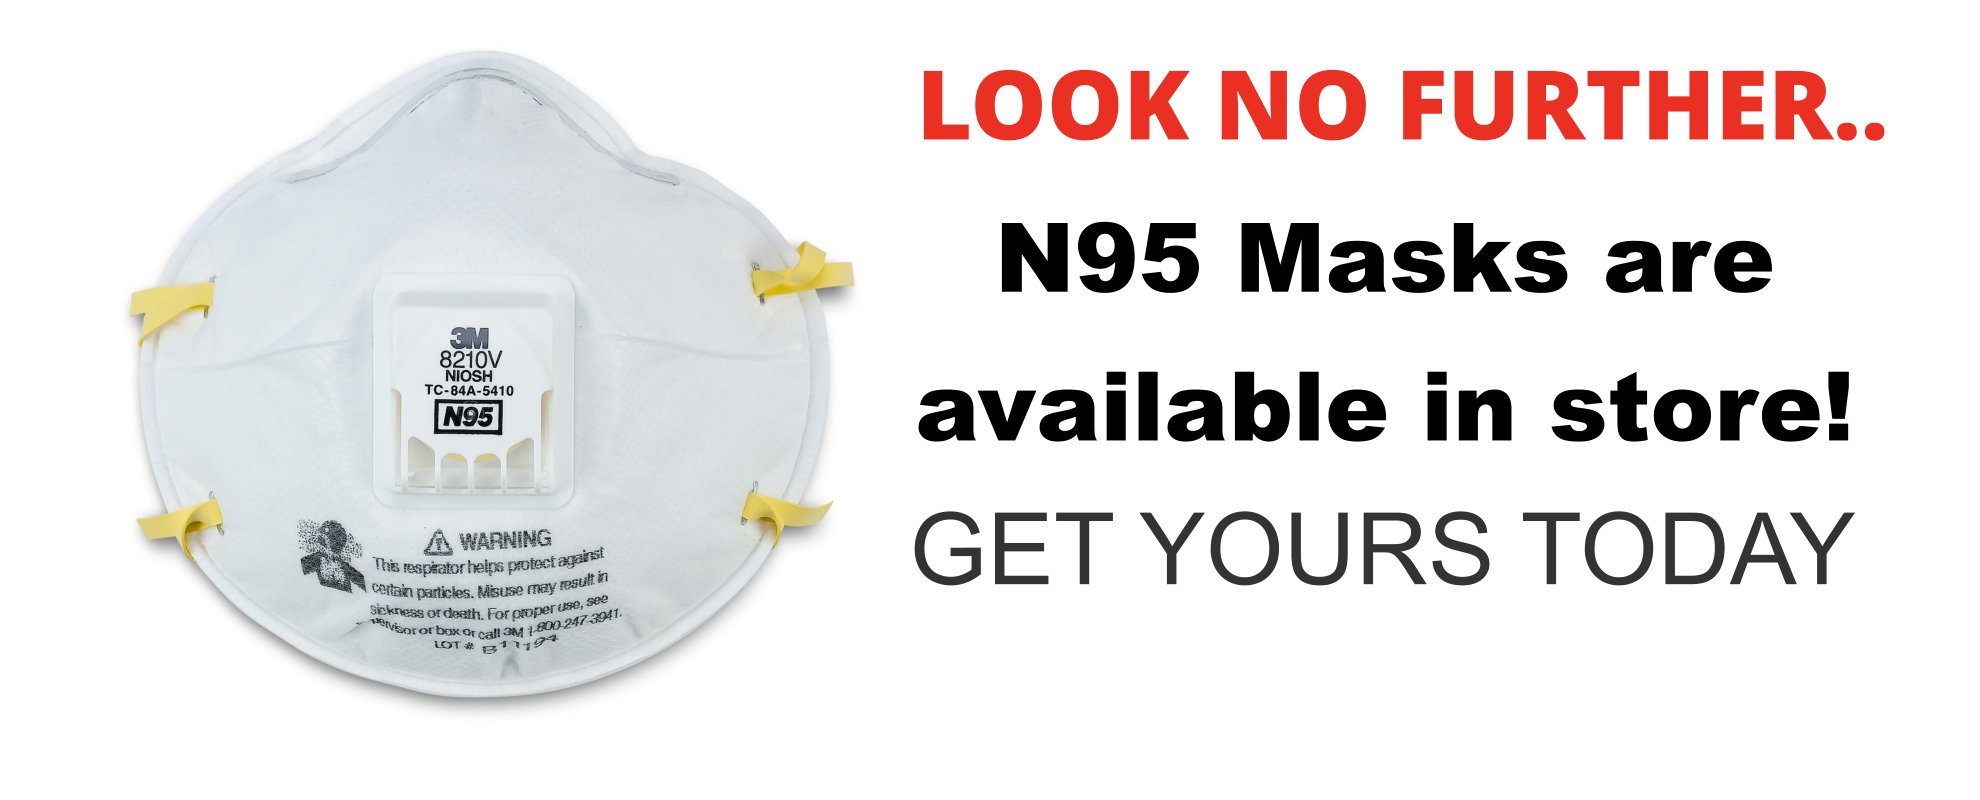 N95 Masks available here